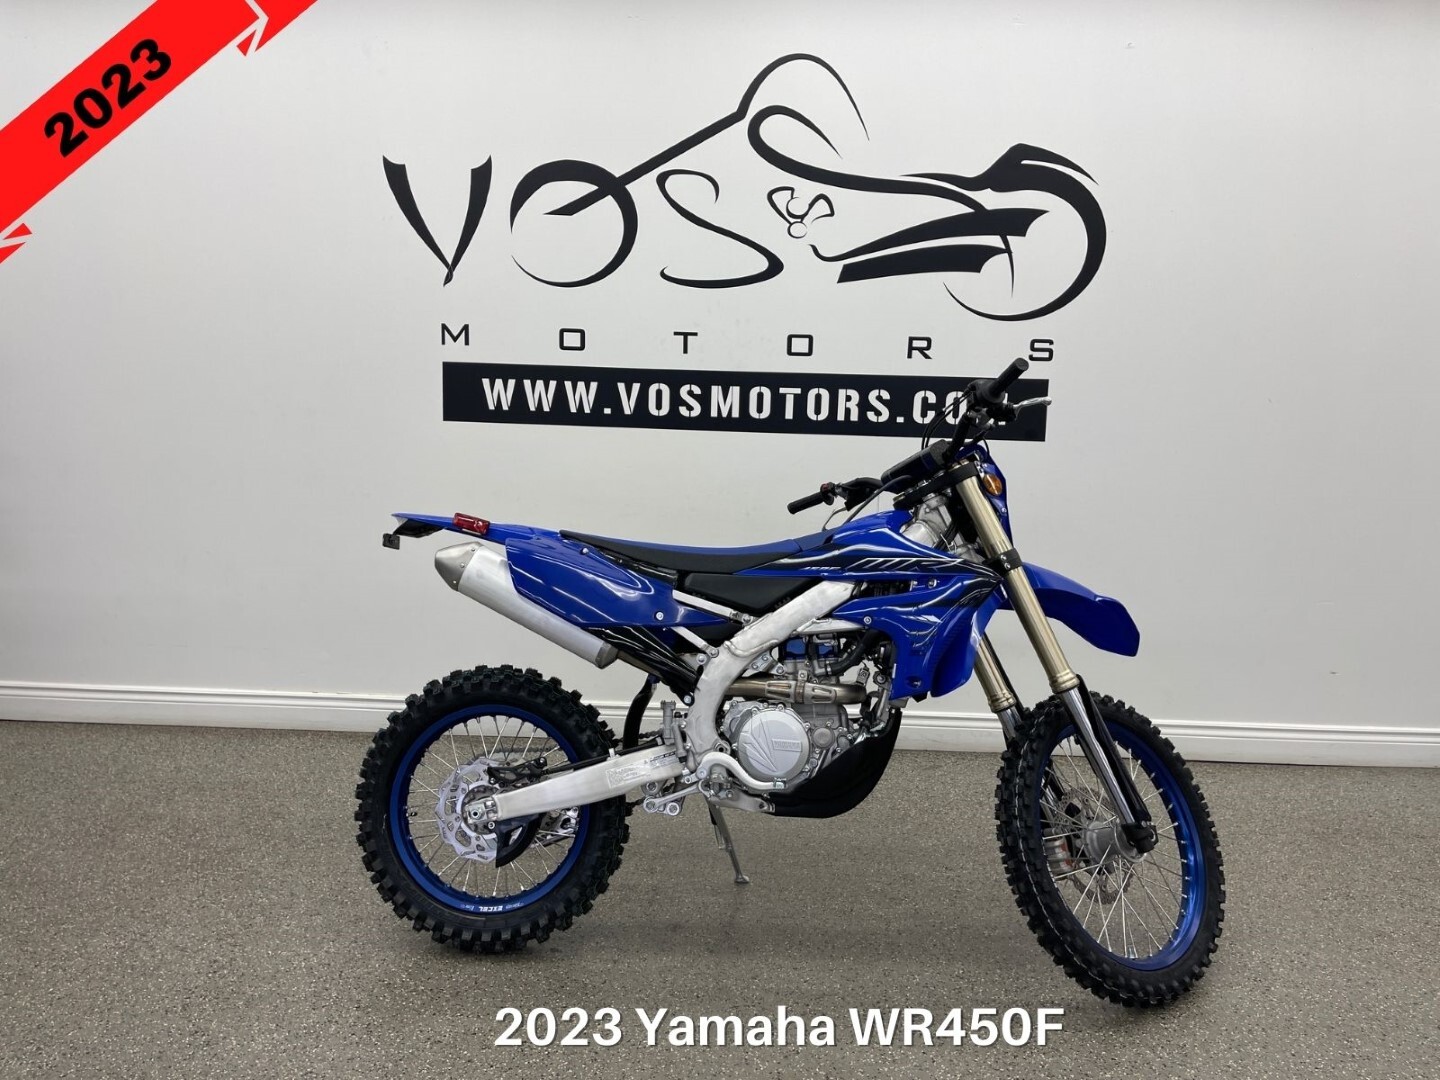 2023 Yamaha WR450FPL WR450F - V5349NP - -No Payments for 1 Year**